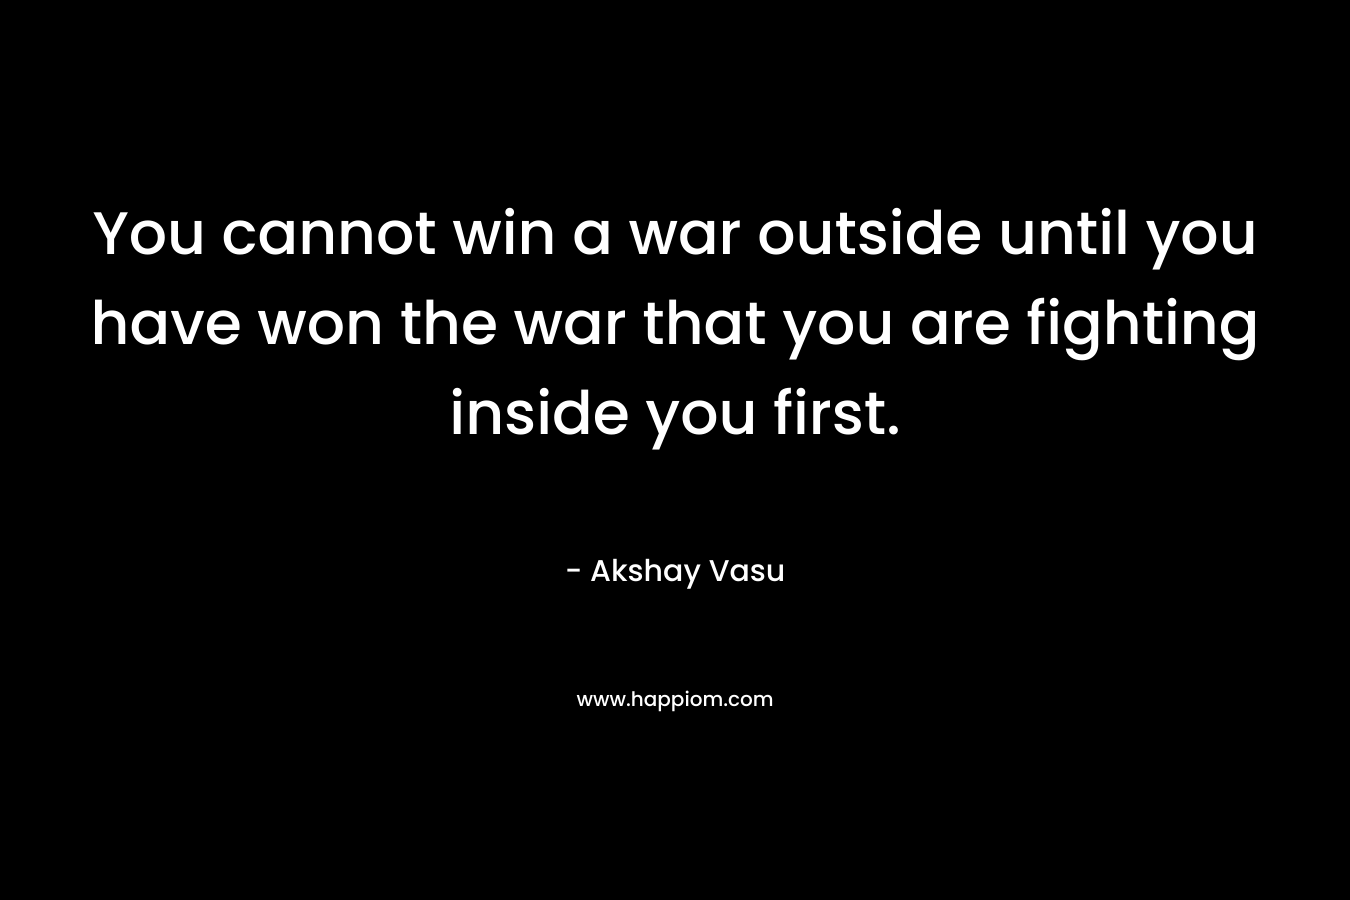 You cannot win a war outside until you have won the war that you are fighting inside you first.